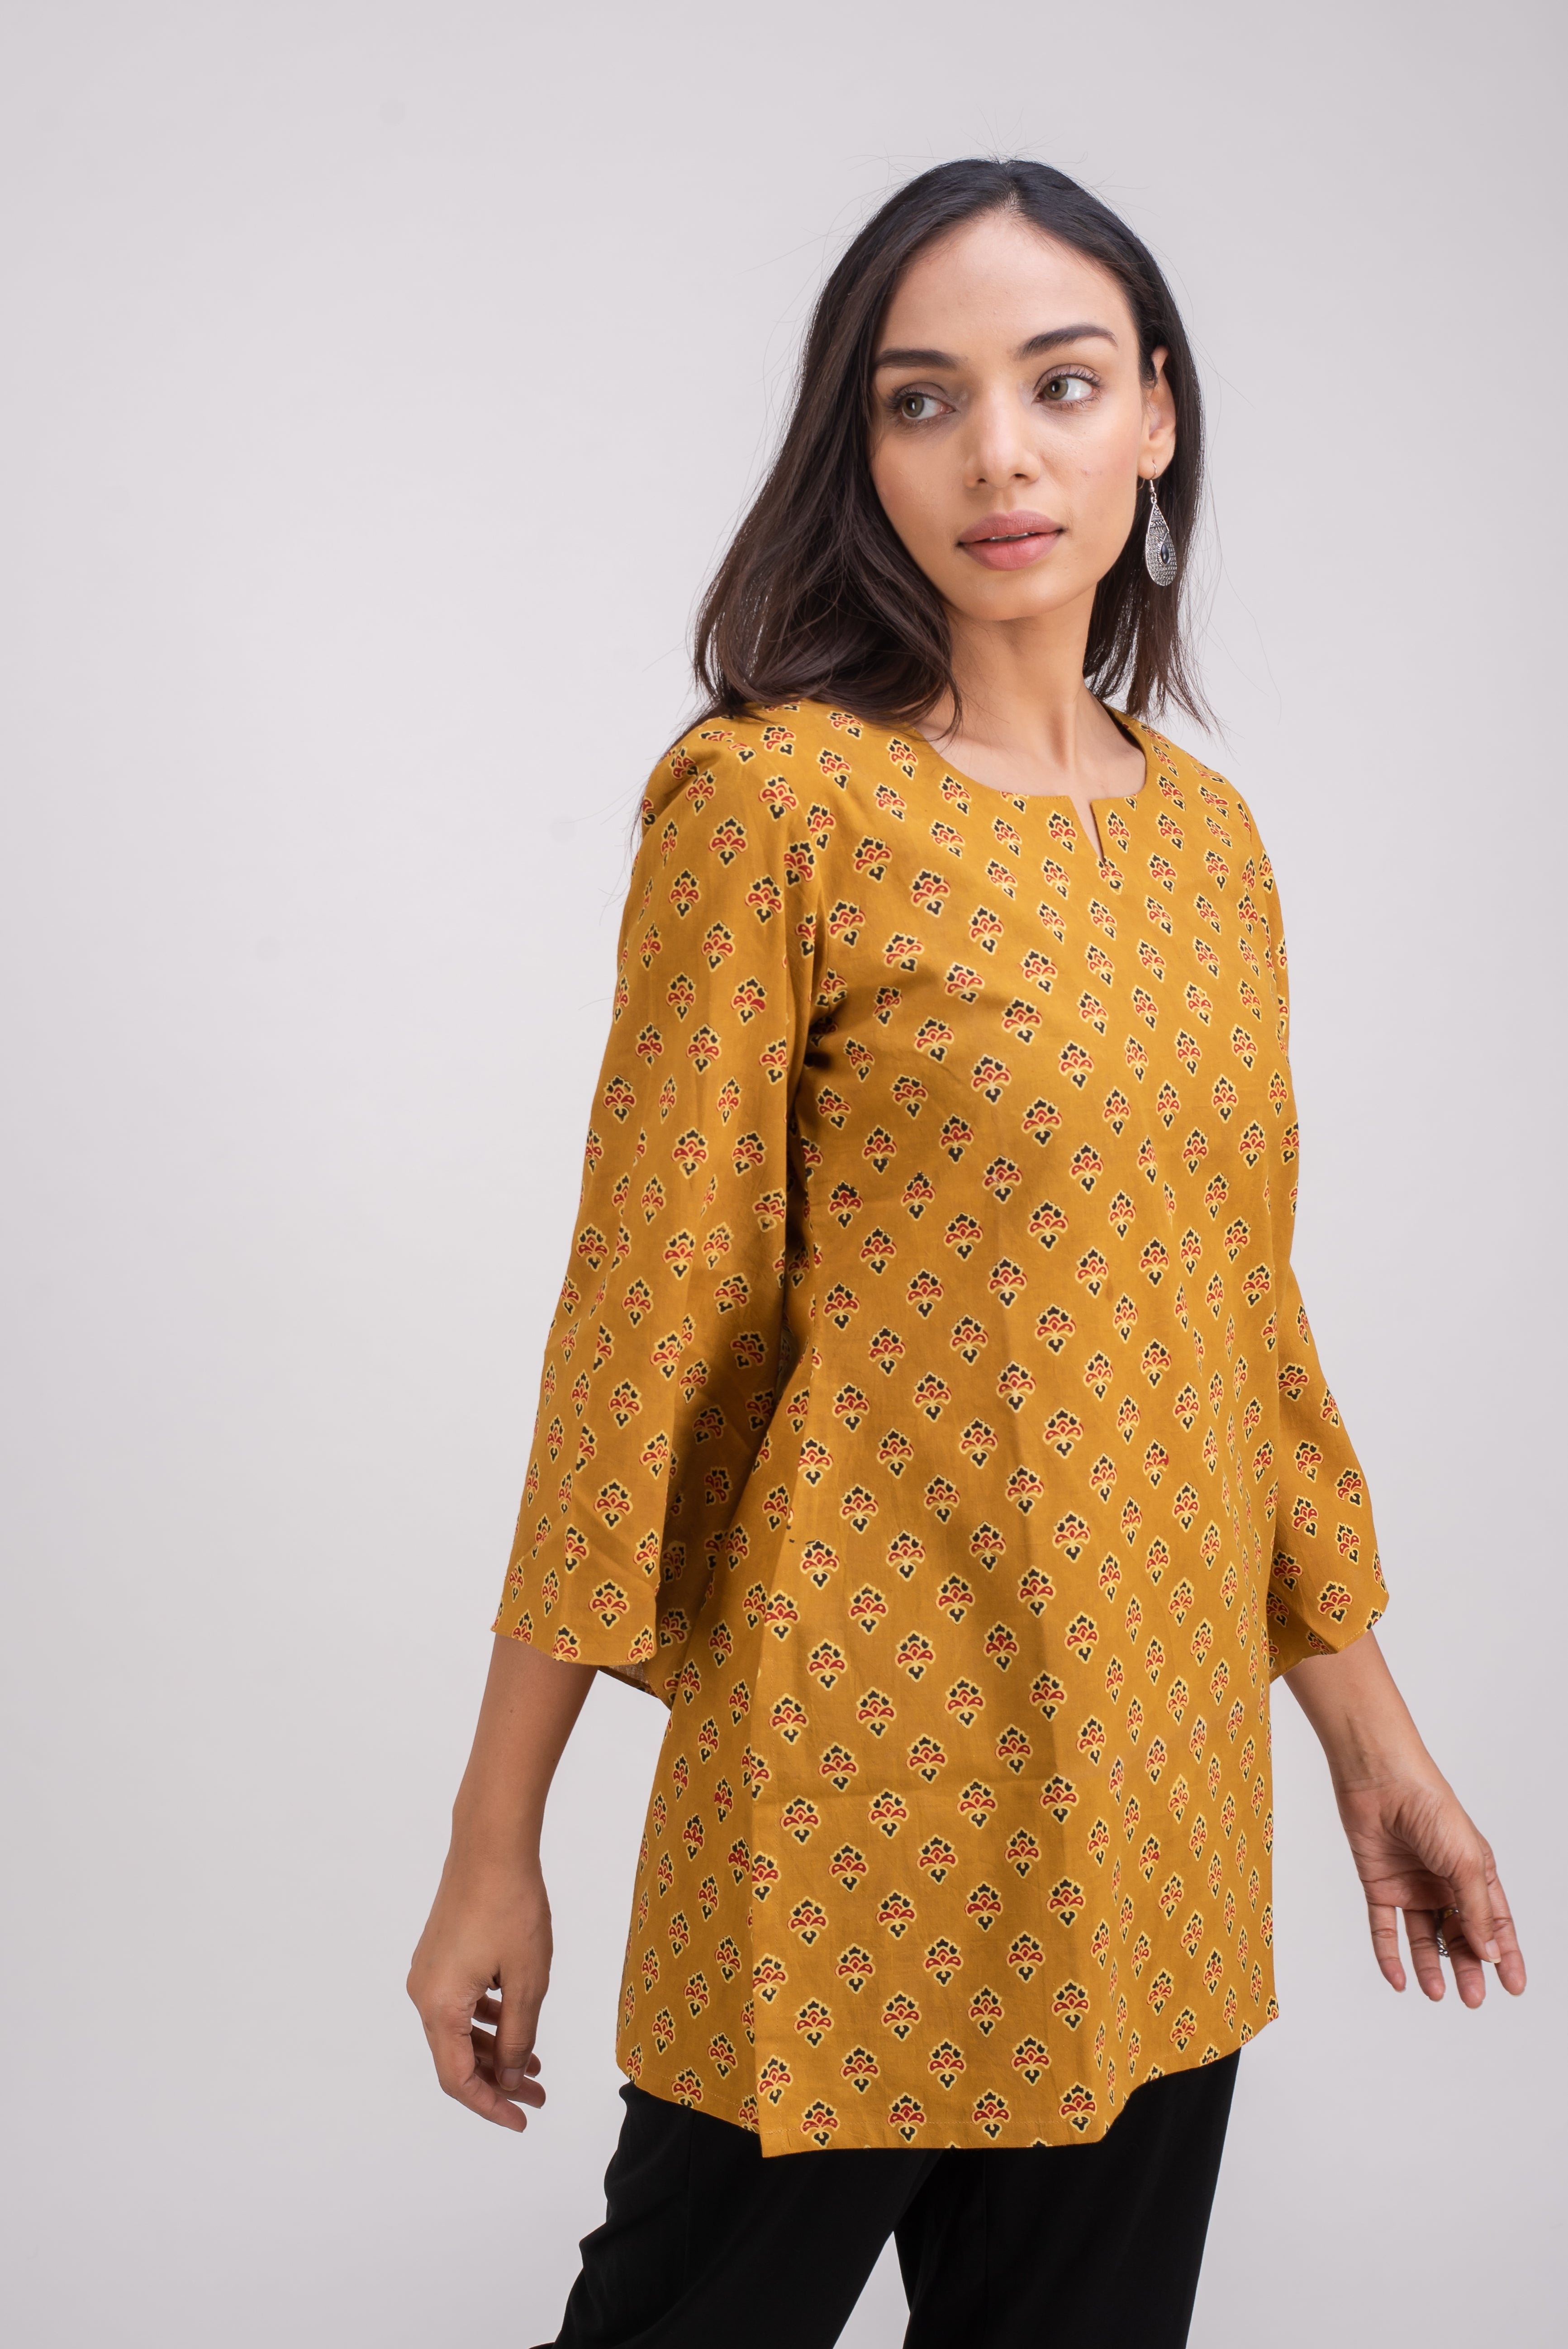 501-106 "Bell" Tunic top